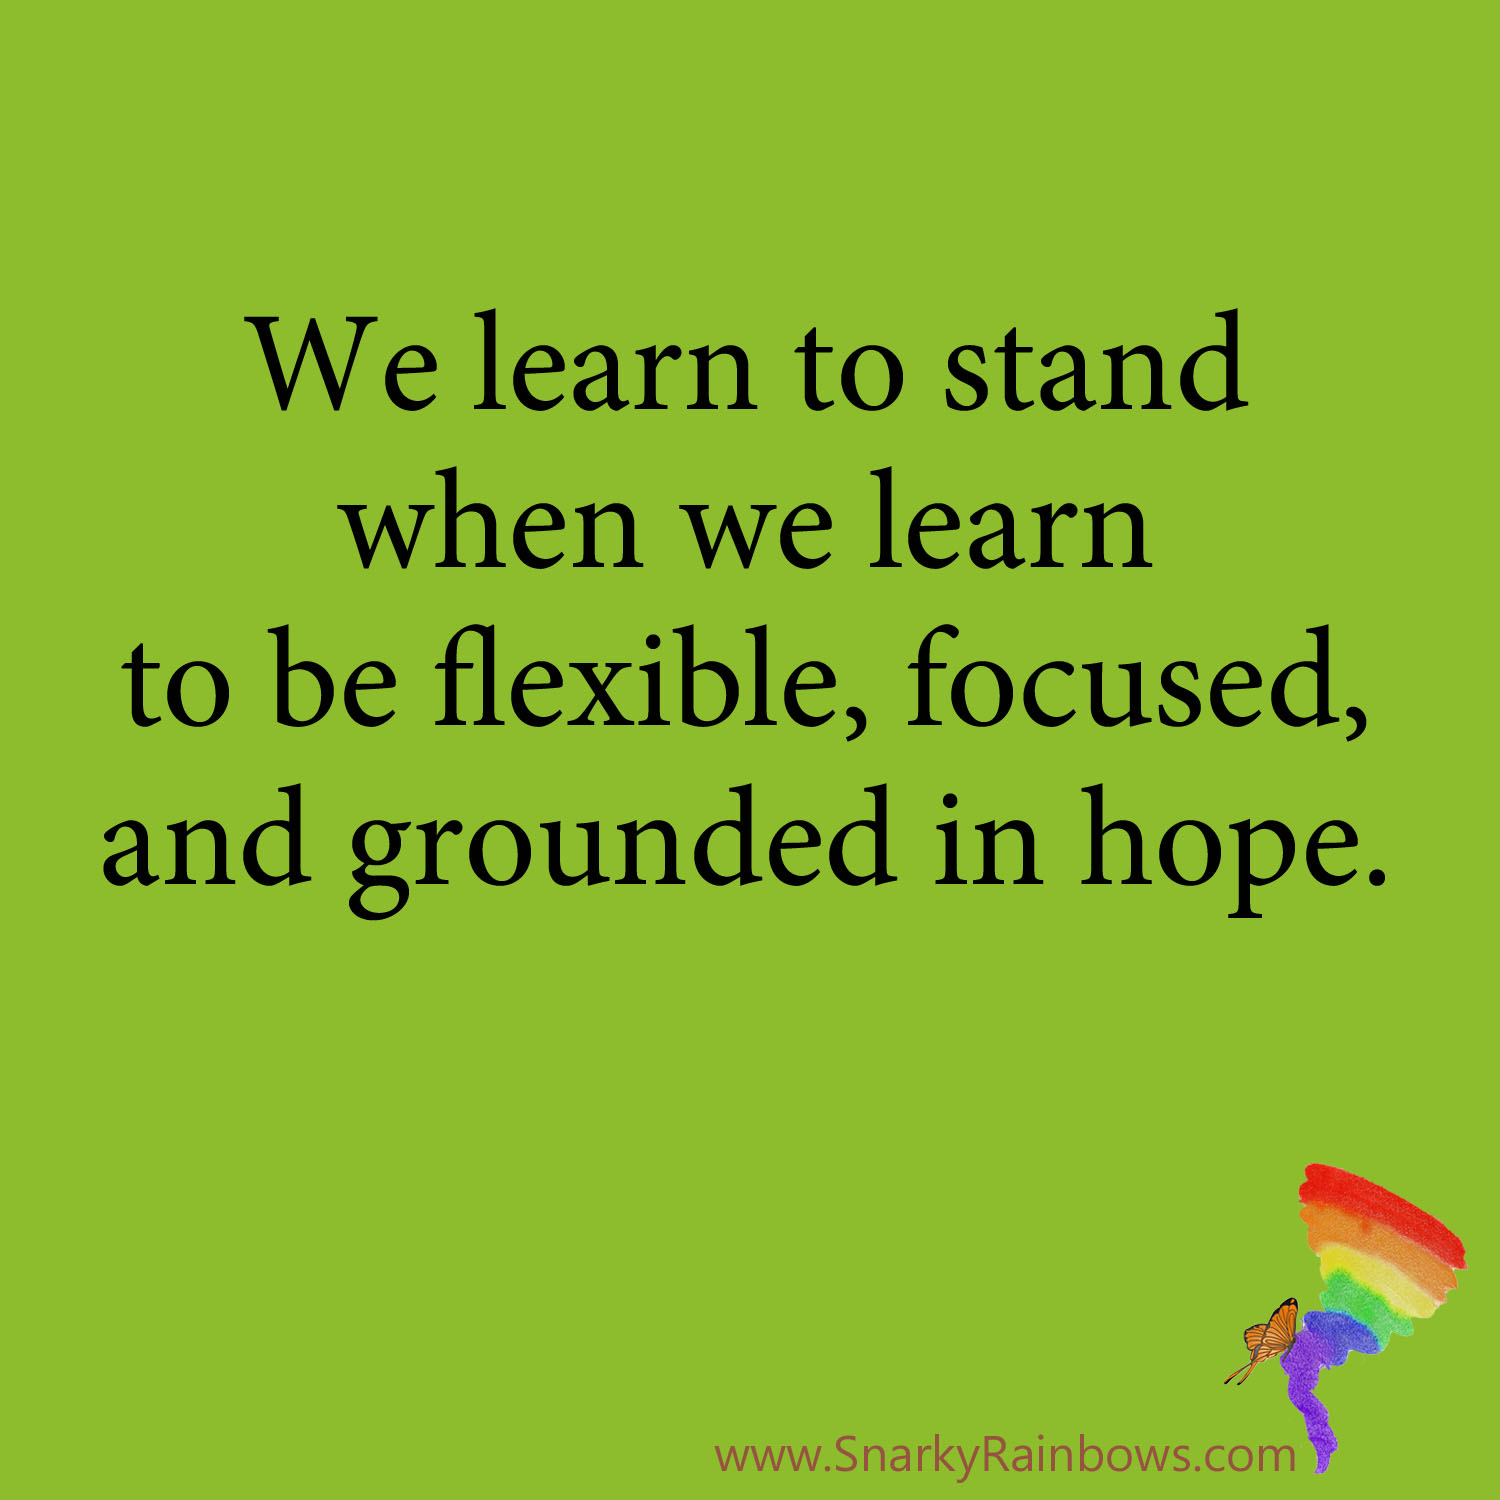 Growing HOPE Daily - quote - learn to stand